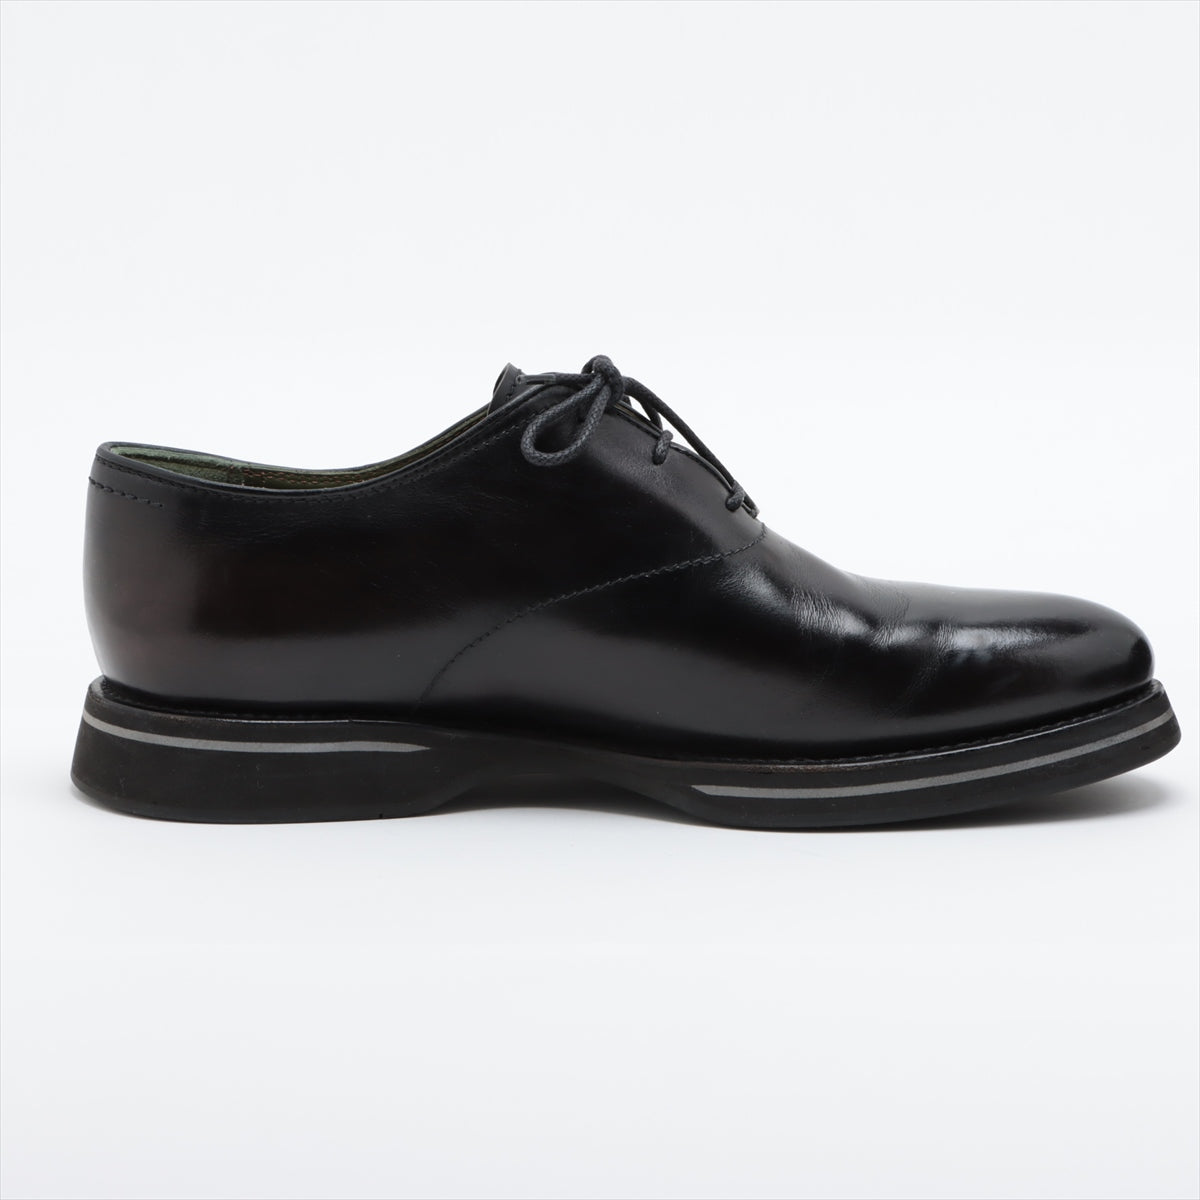 Berluti Leather Leather shoes 10 Men's Black Calligraphy Comes with genuine shoe tree